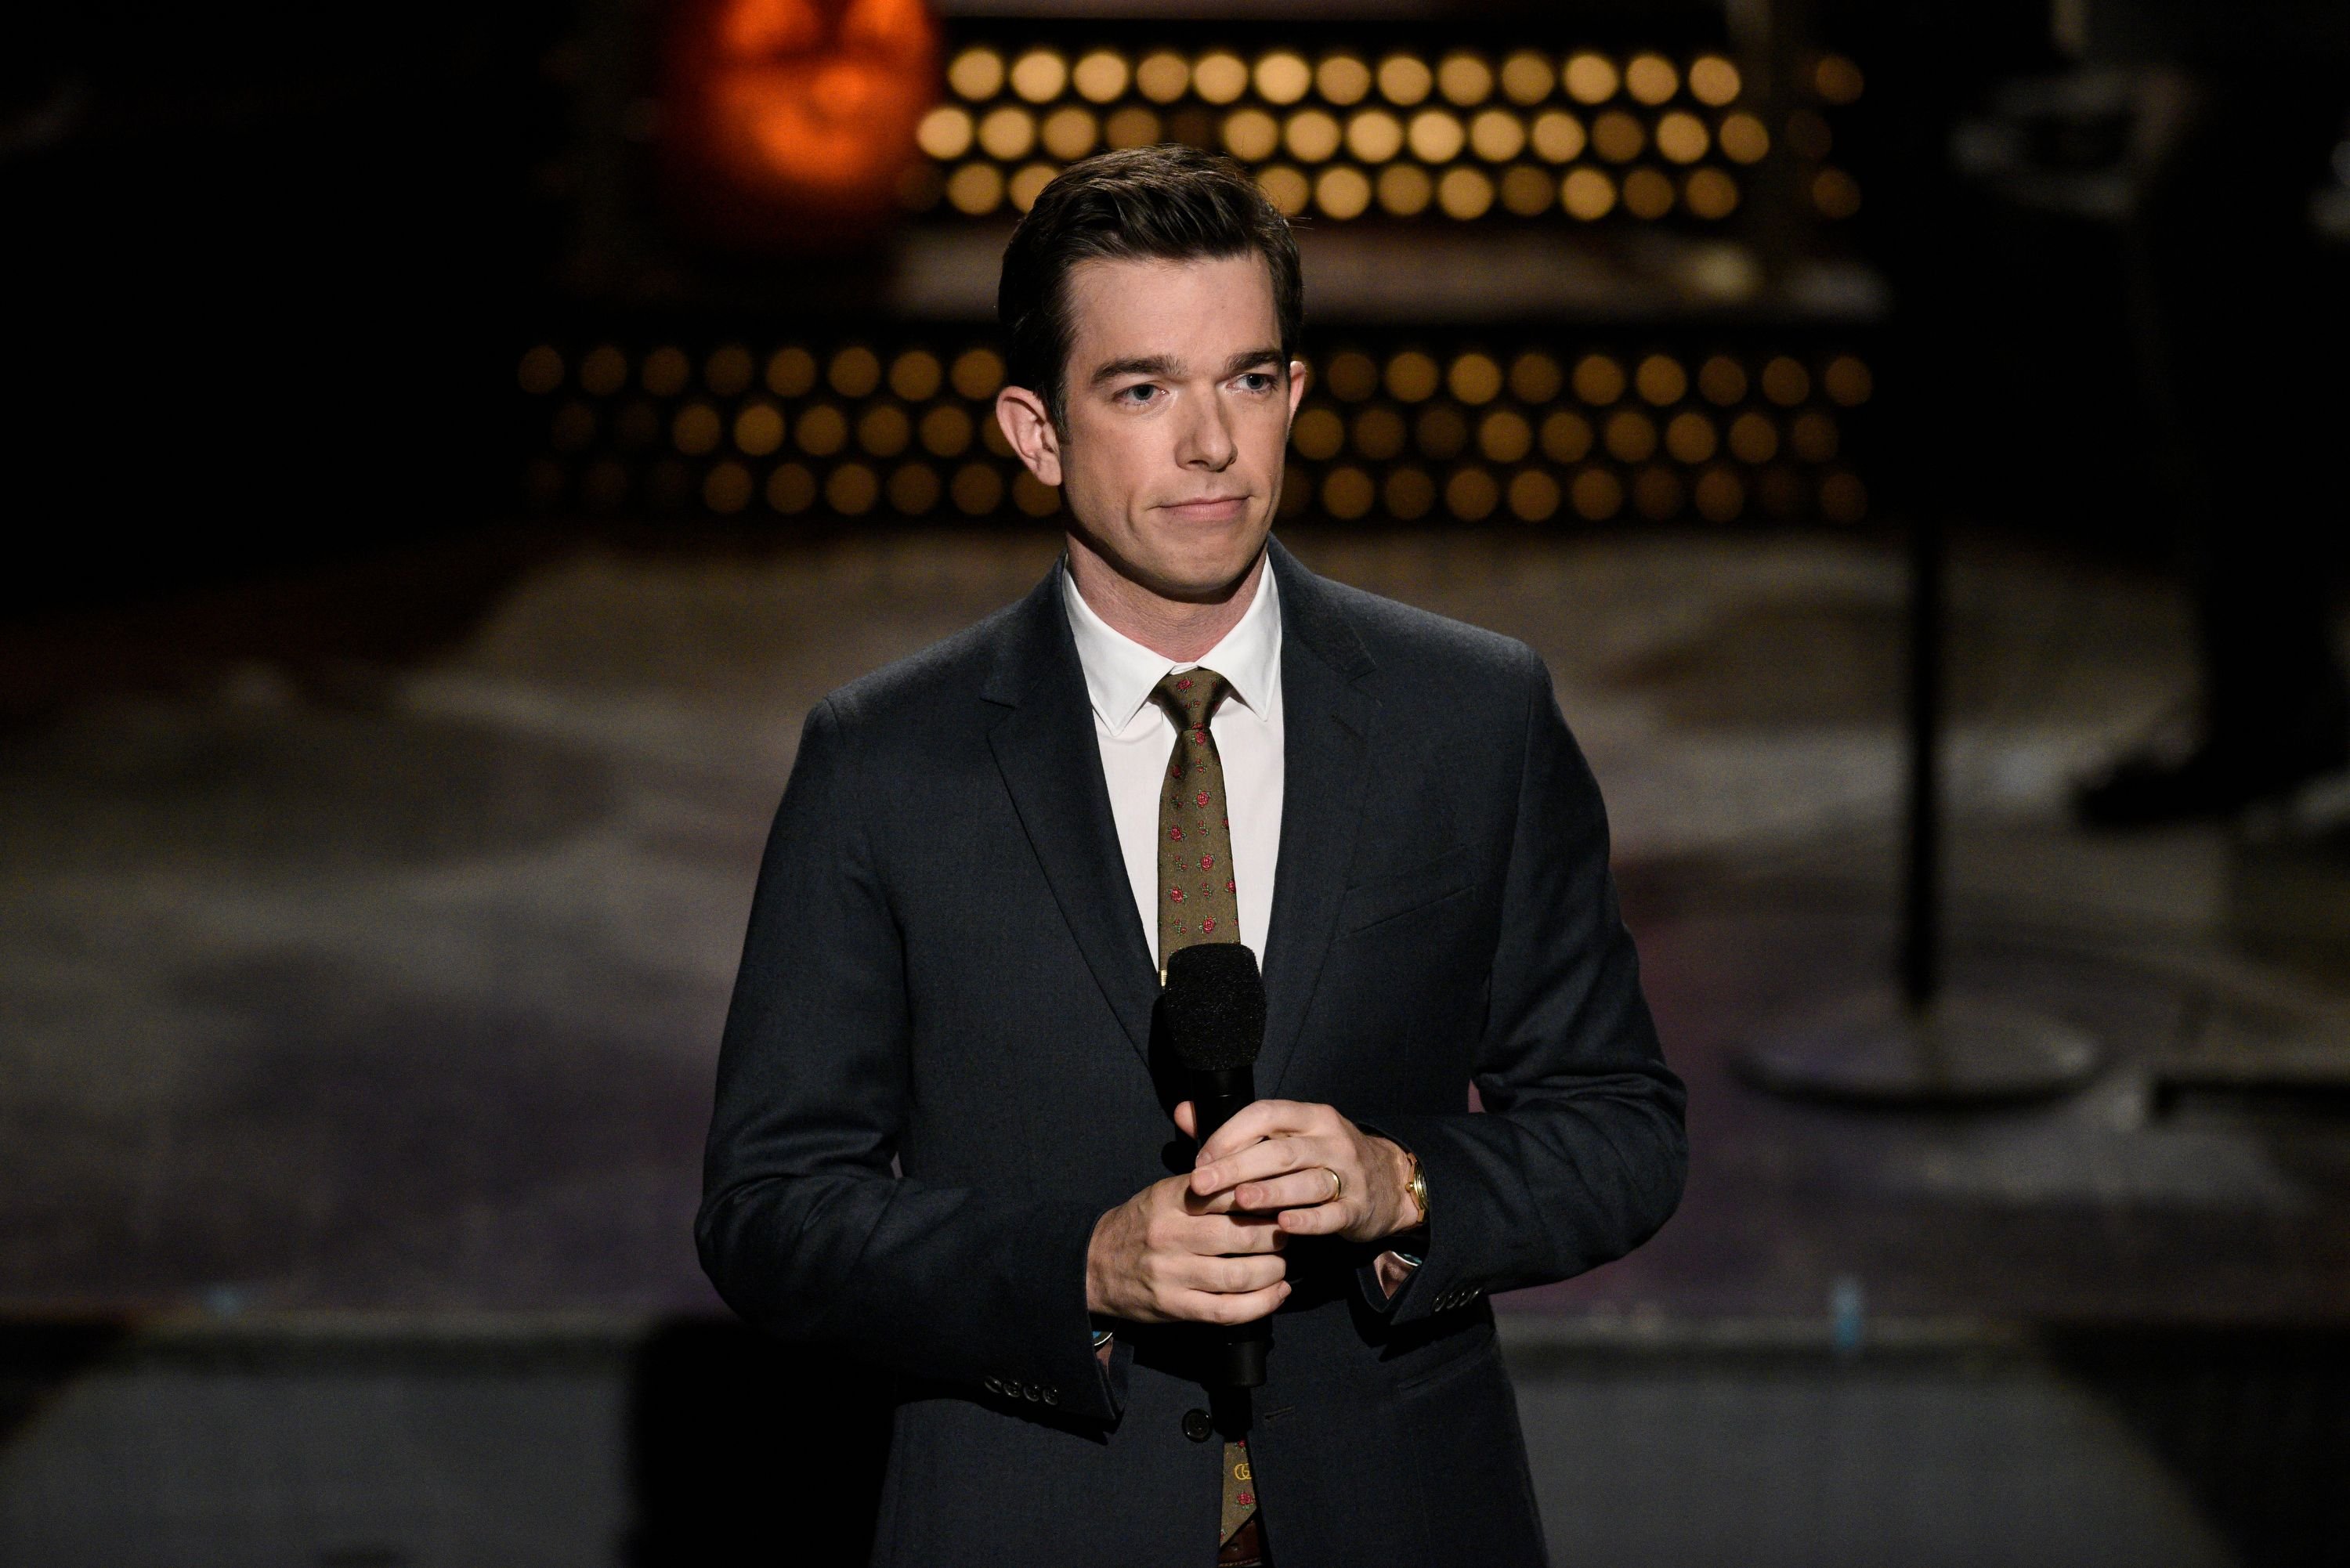 John Mulaney doing a monologue on episode 1790 of "Saturday Night Live" on October 31, 2020 | Photo: Kyle Dubiel/NBC/NBCU Photo Bank/Getty Images